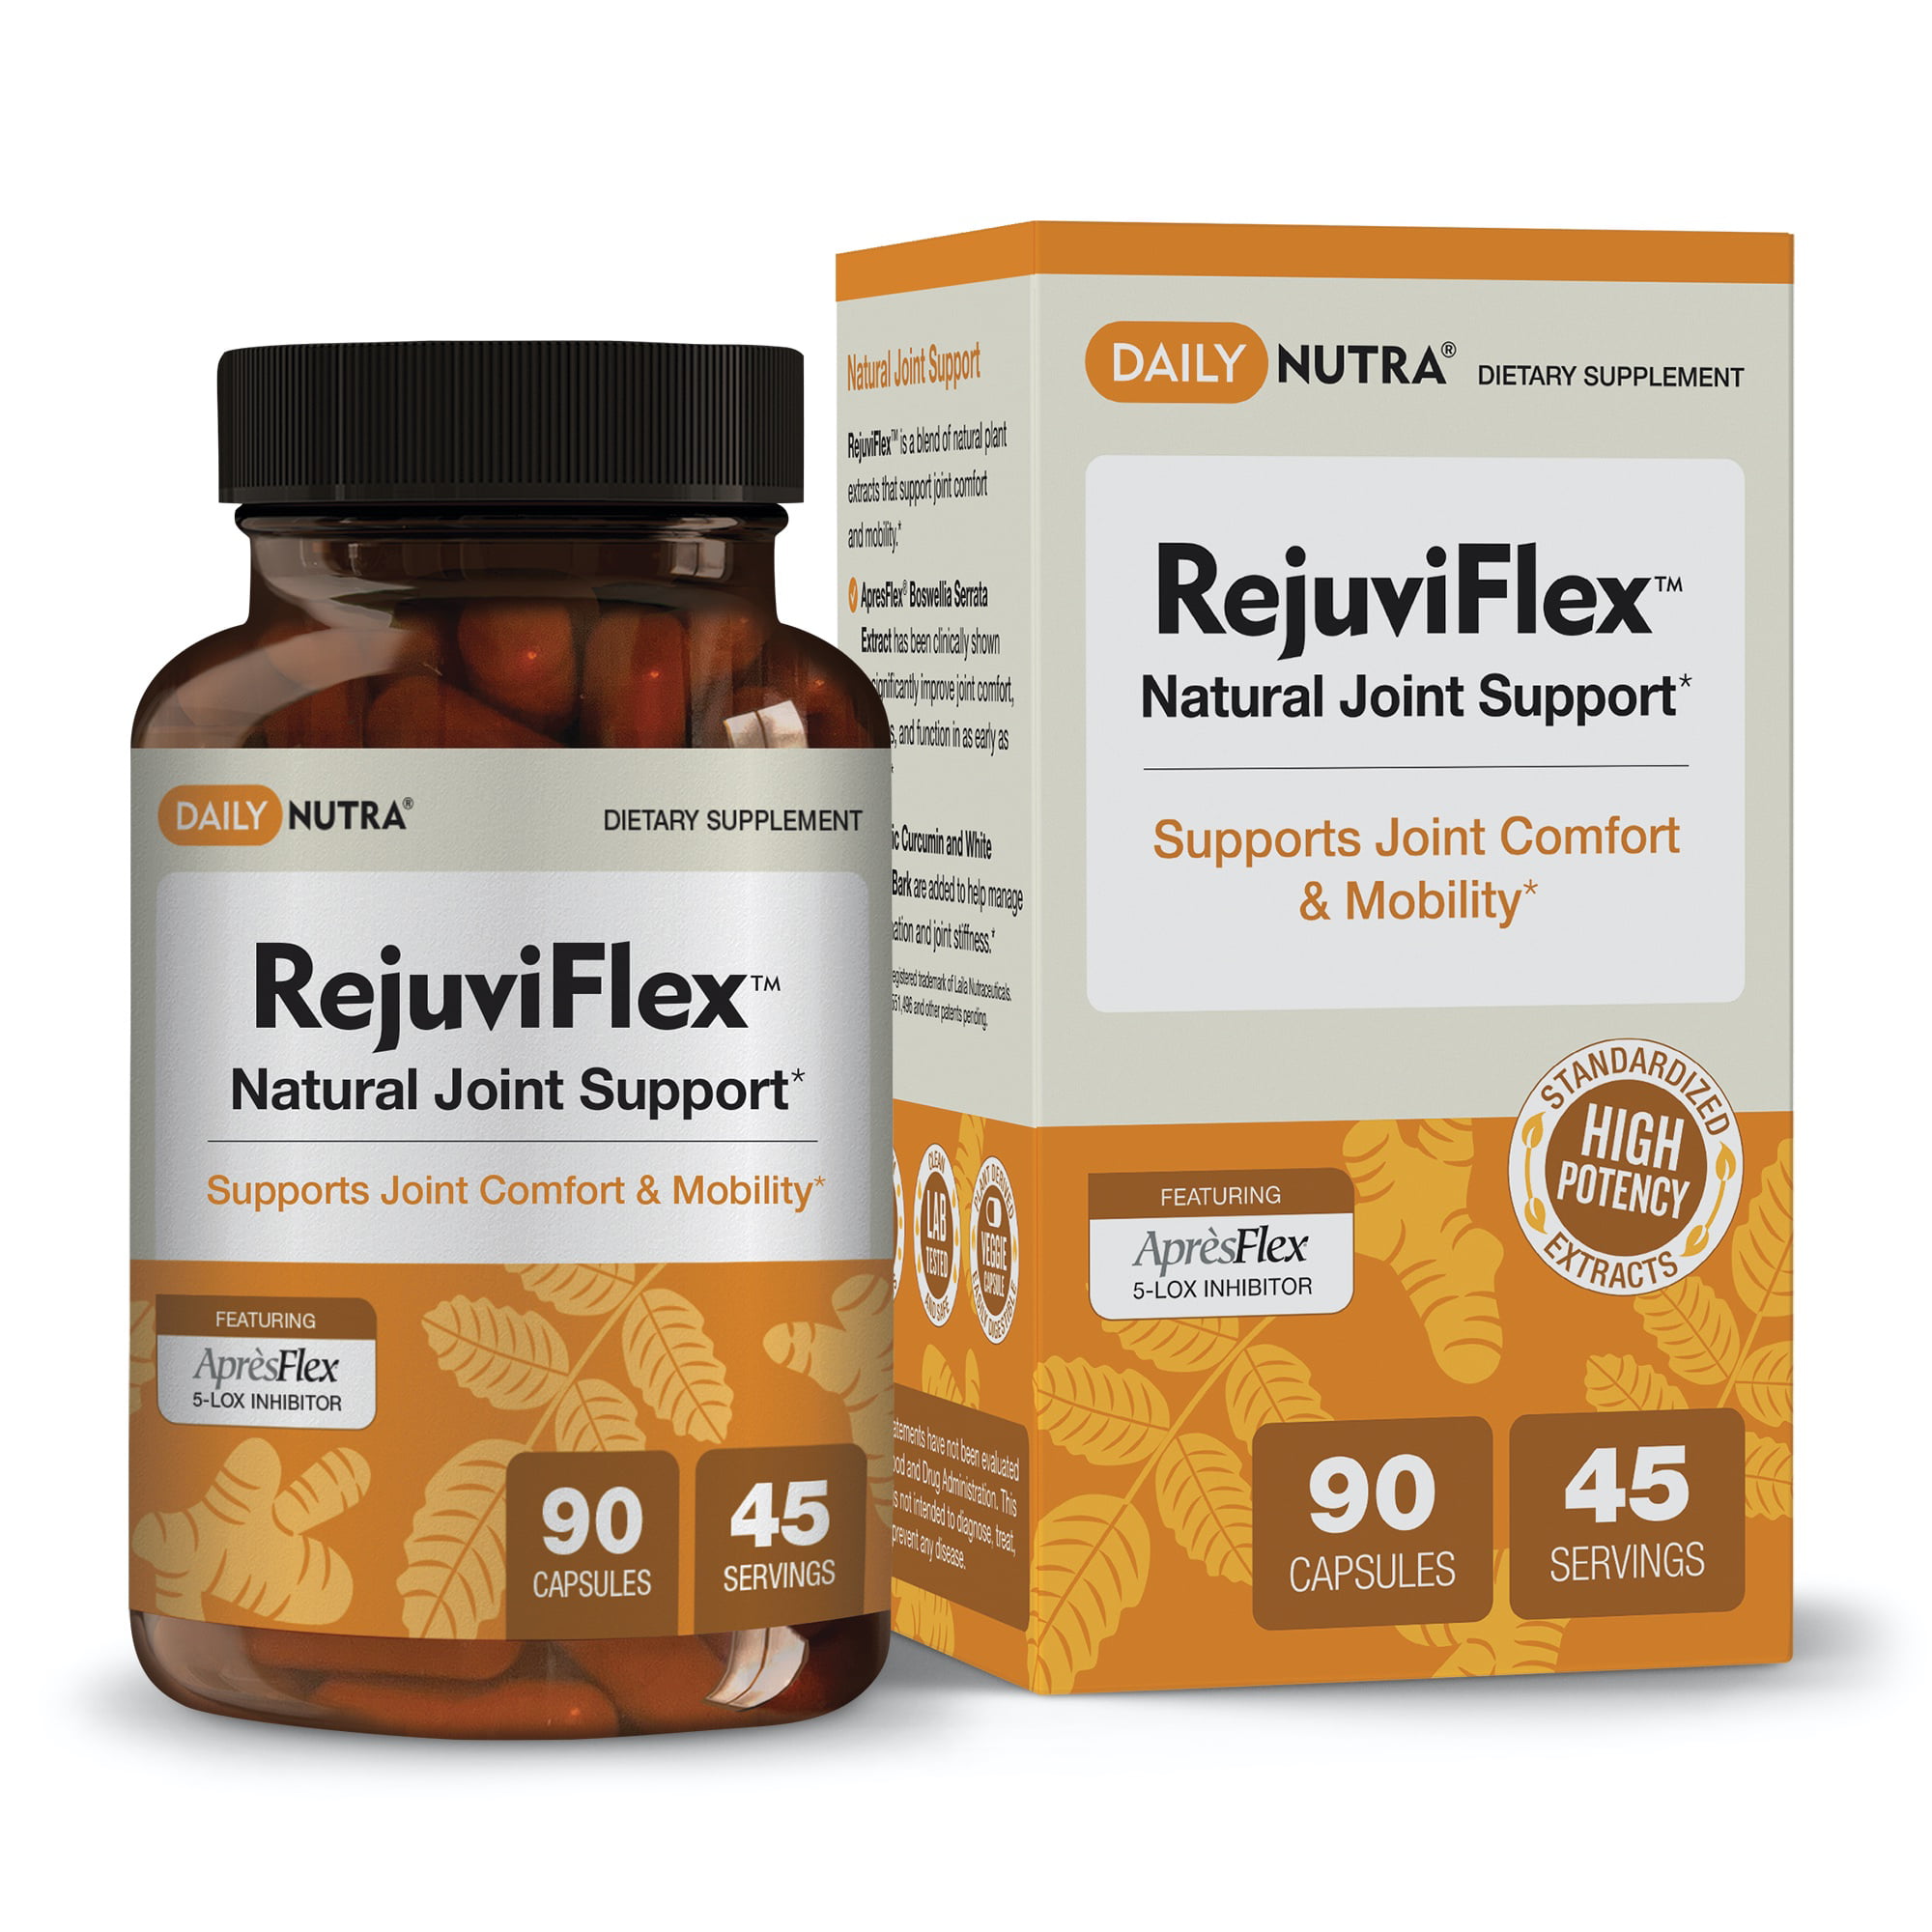 RejuviFlex by DailyNutra Natural Joint Supplement for